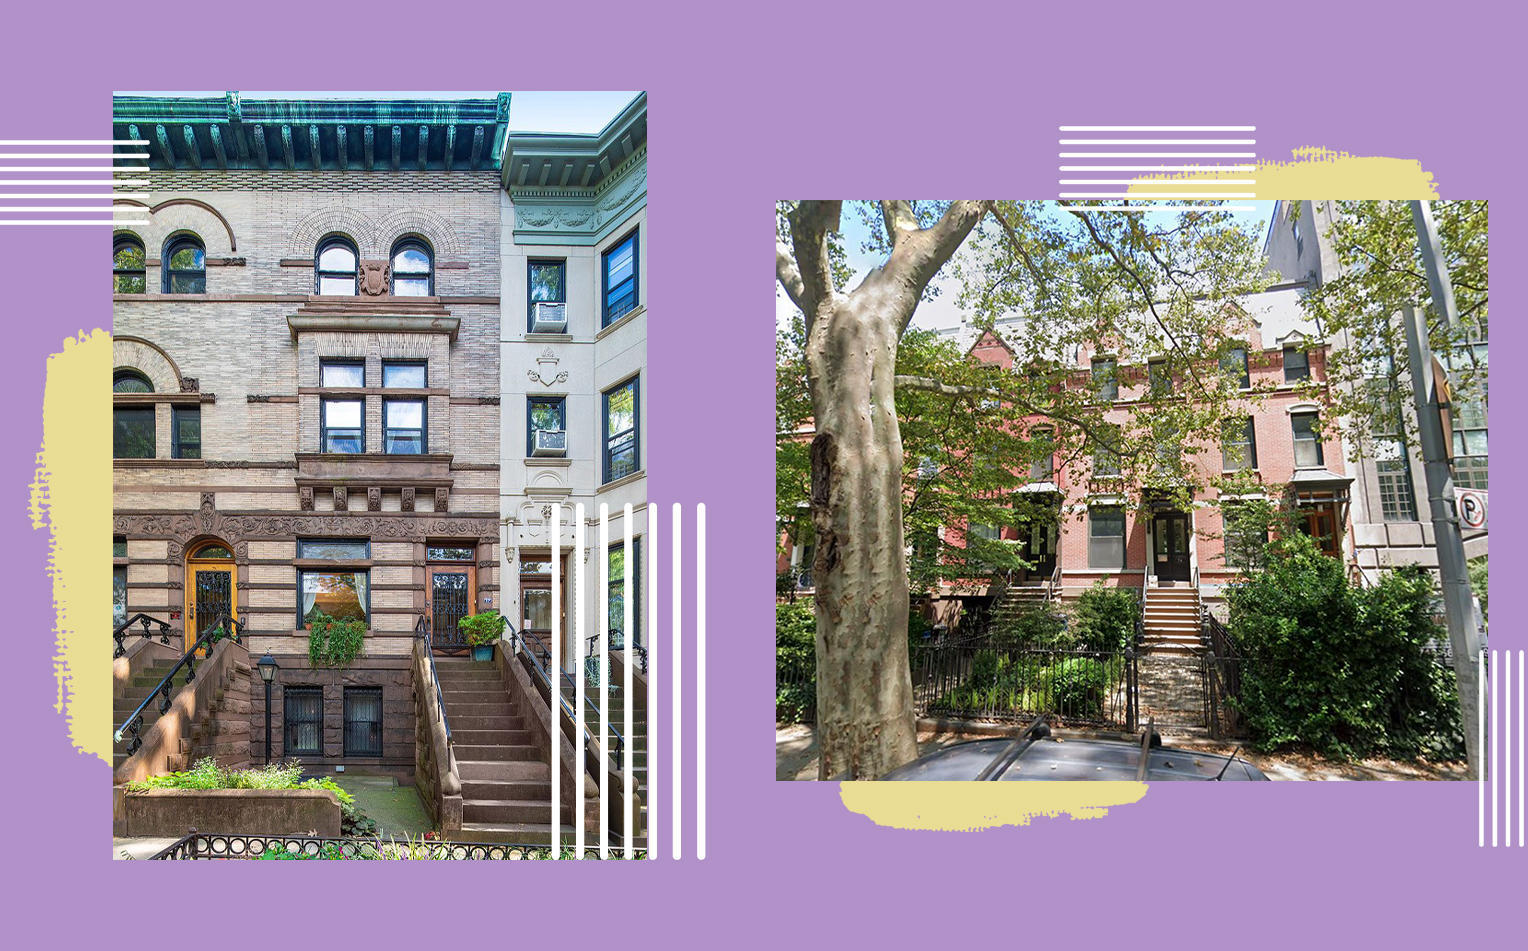 17 Polhemus Place and 7A 2nd Place in Brooklyn (Photos via StreetEasy; Google Maps)